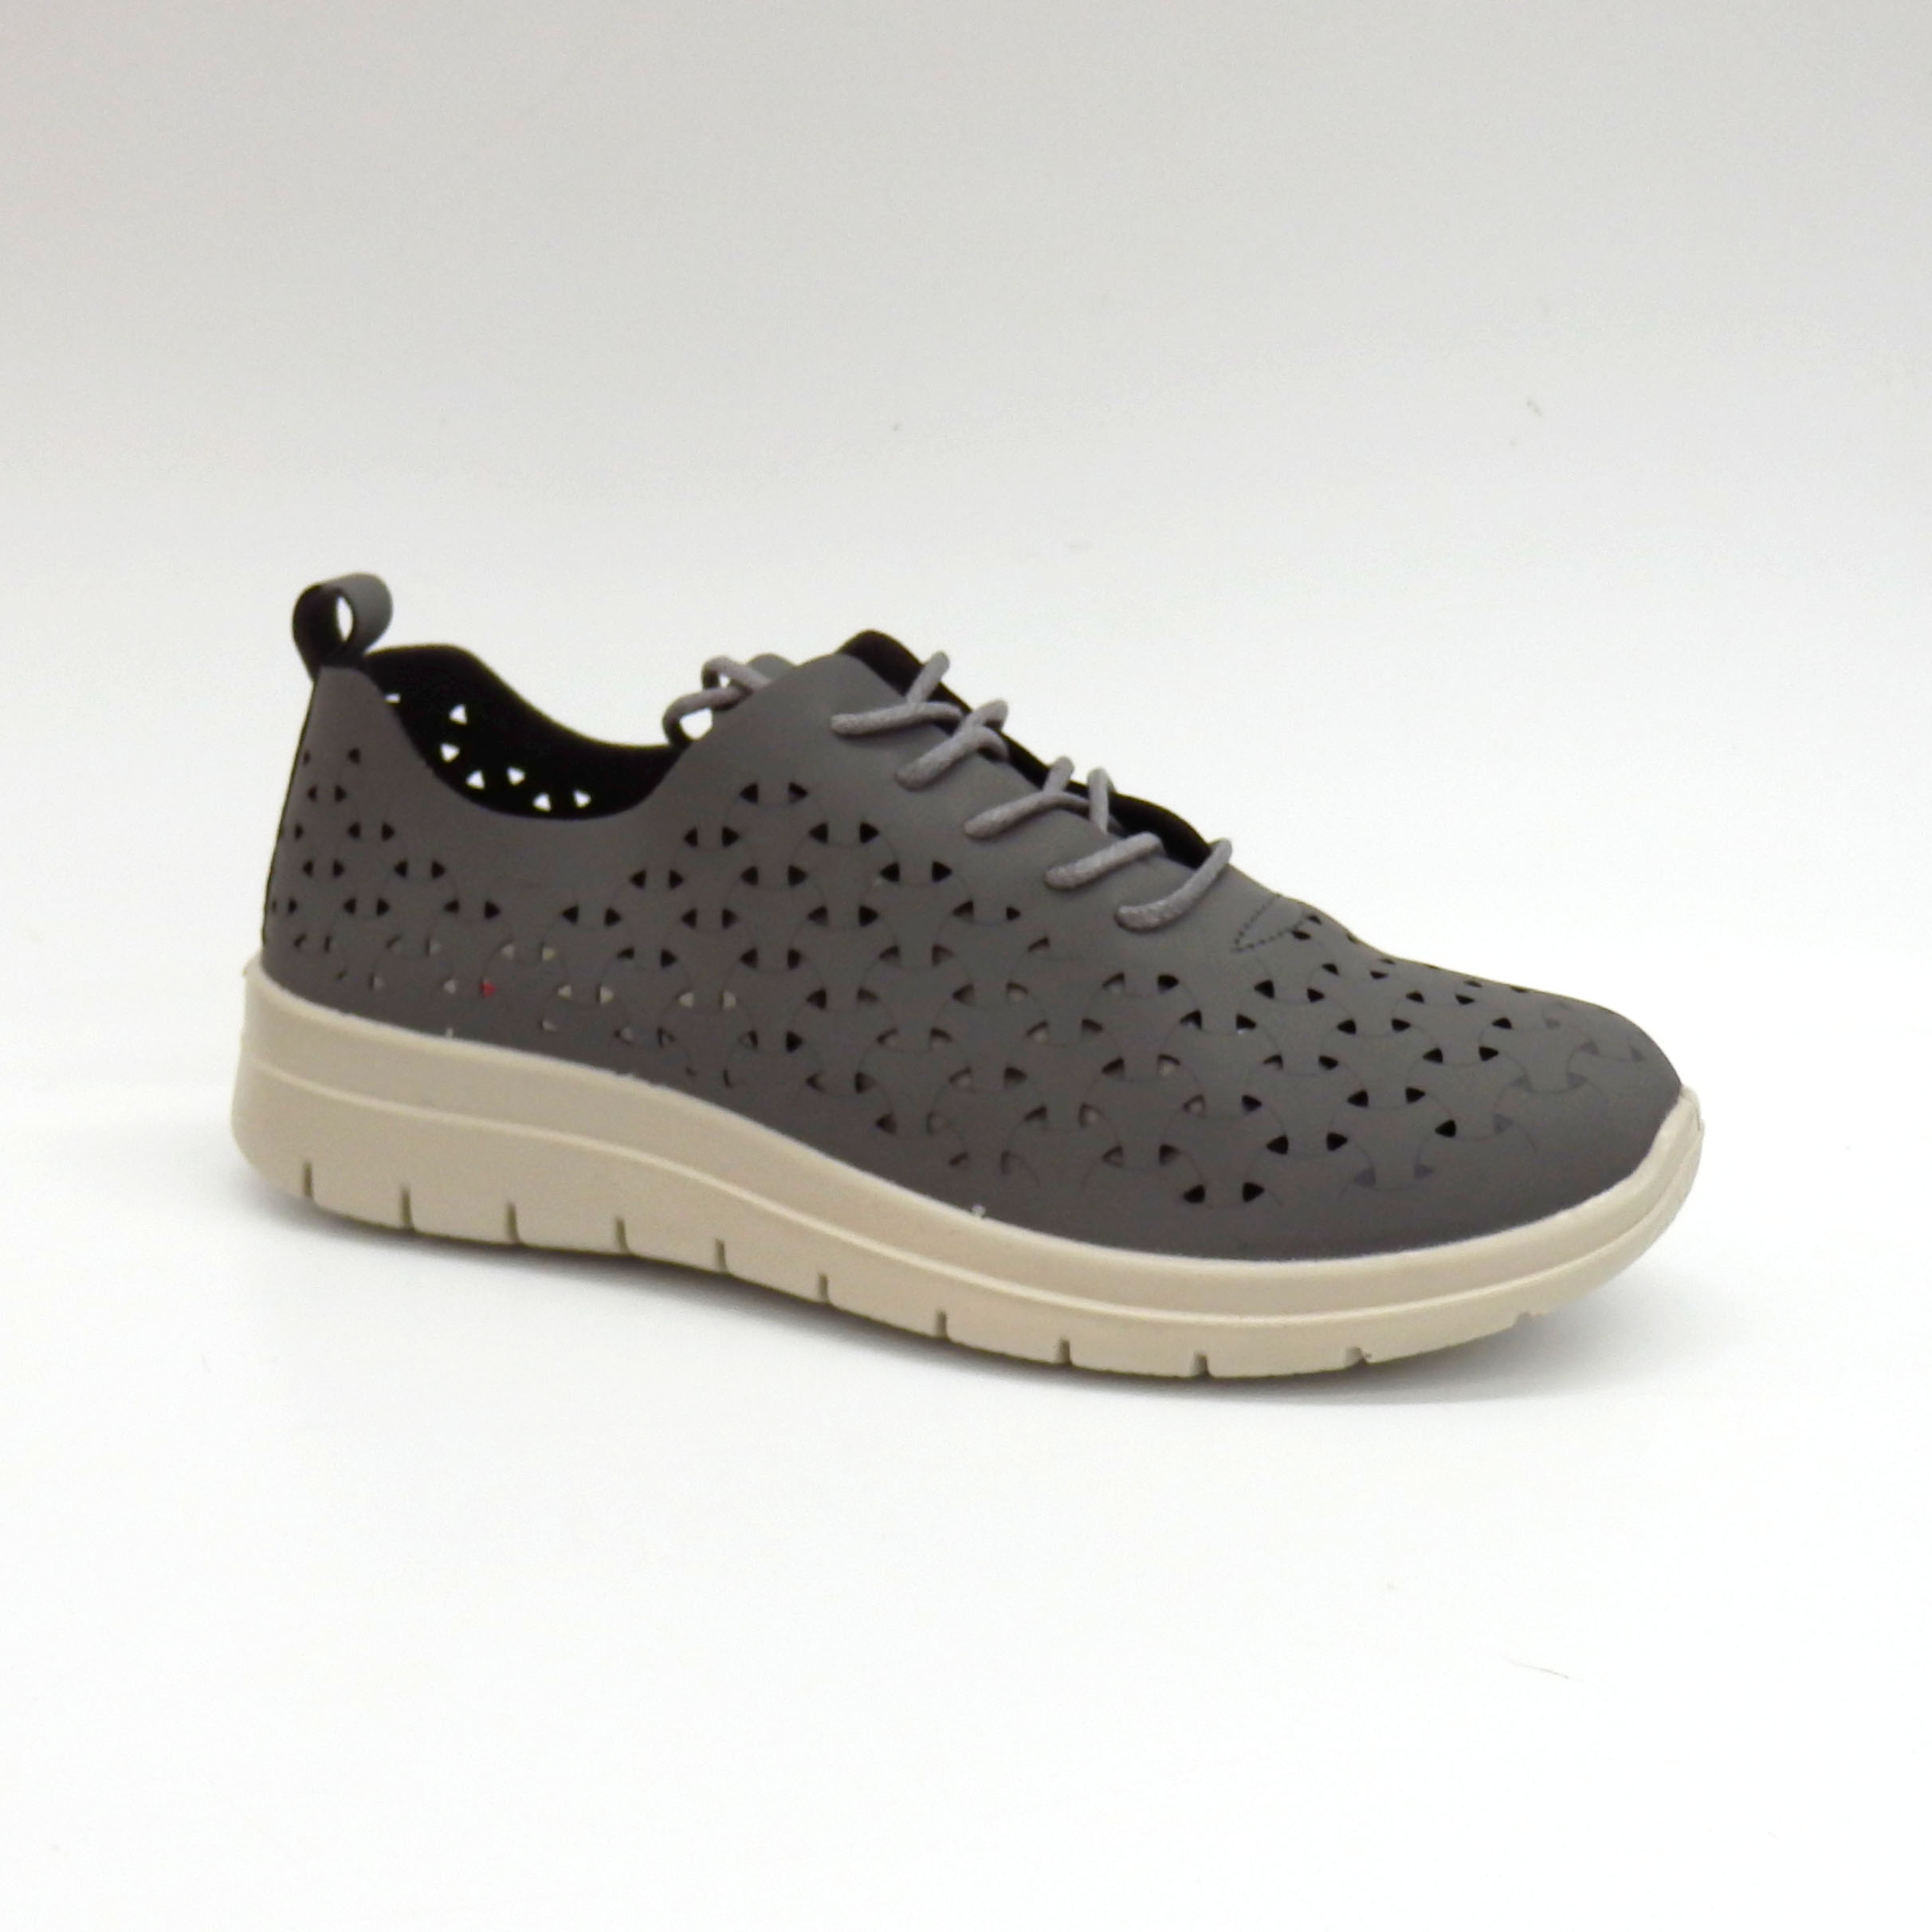 tamicus blucher gris 218 lcs lcs mujer TAMICUS BLUCHER GRIS 218  LCS LCS MUJER